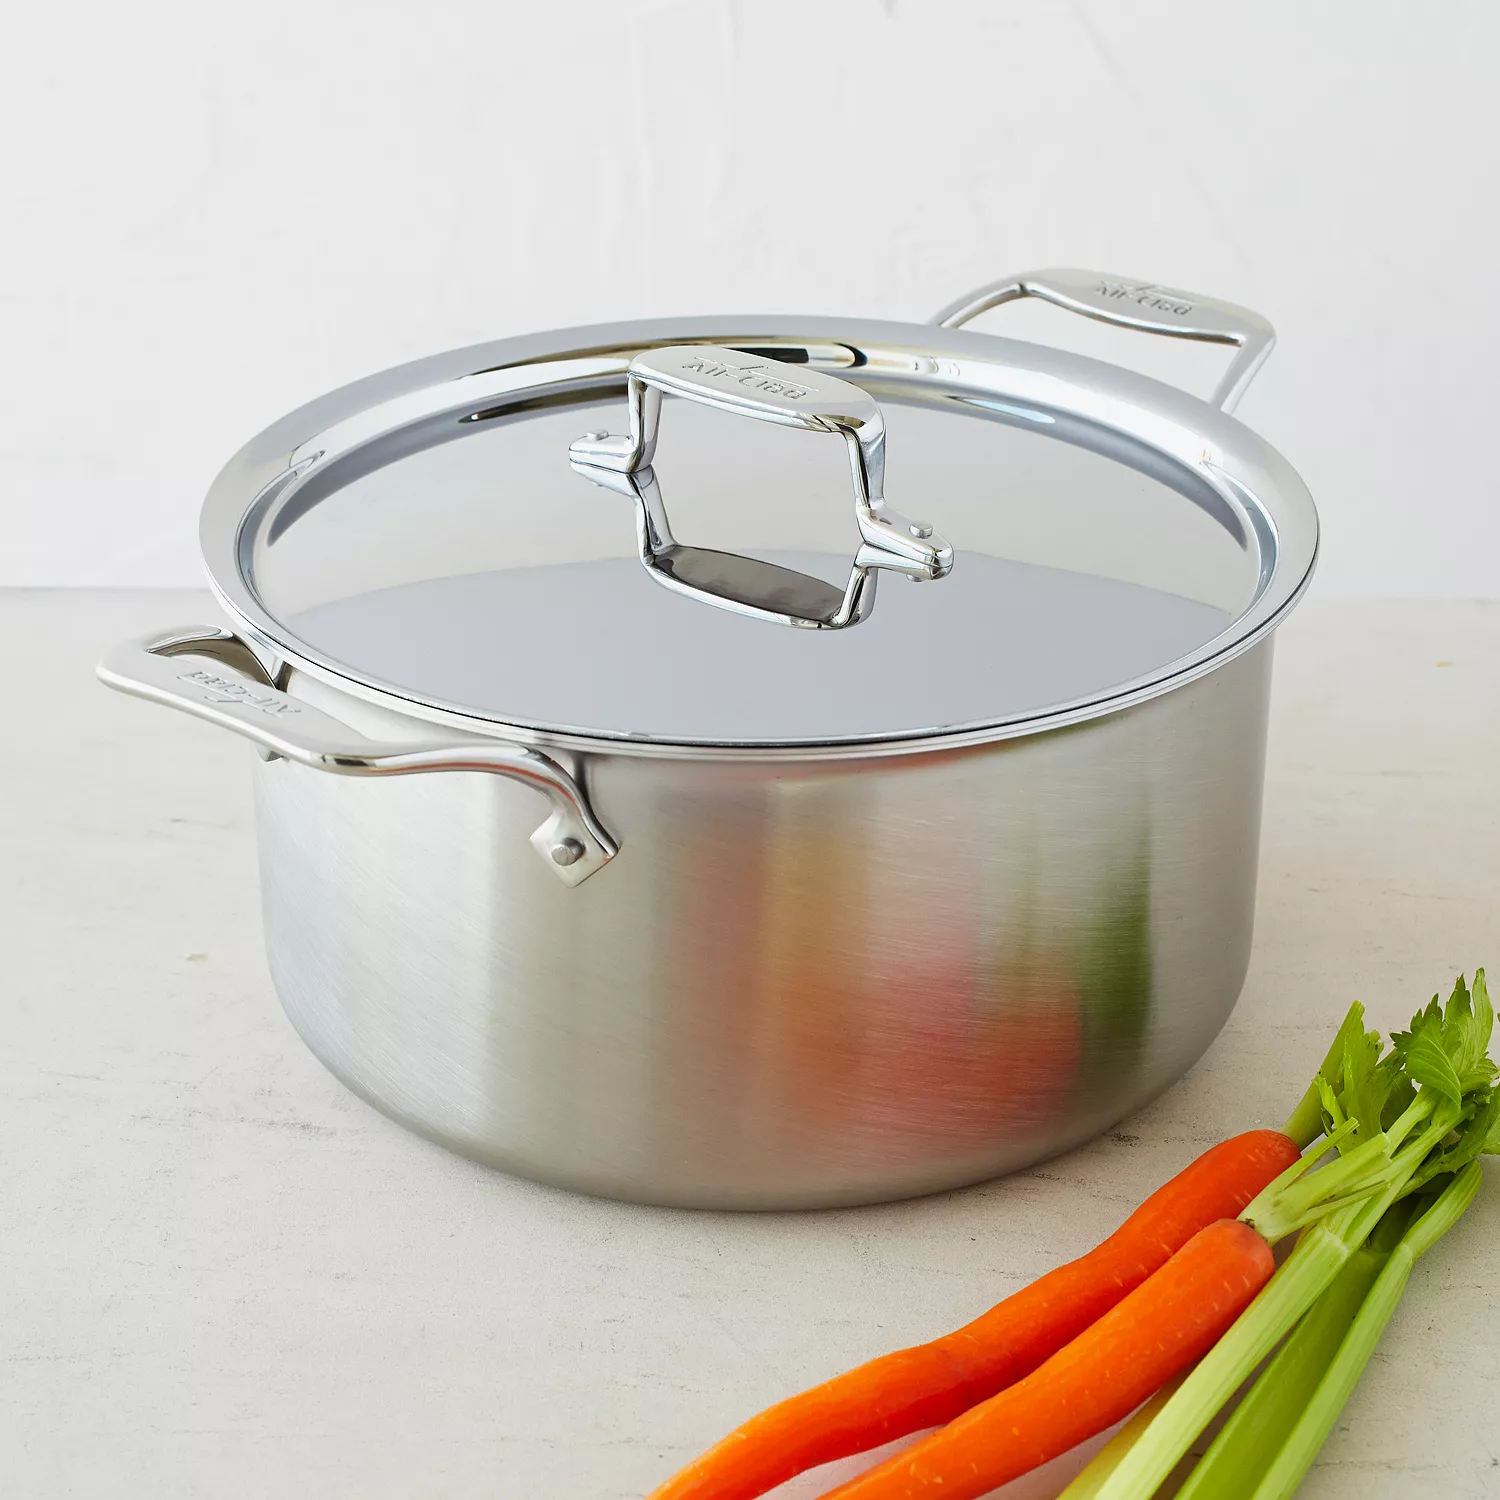 All-Clad D5 Brushed 5-ply Bonded 12 qt Stock Pot with Lid & SS spatula